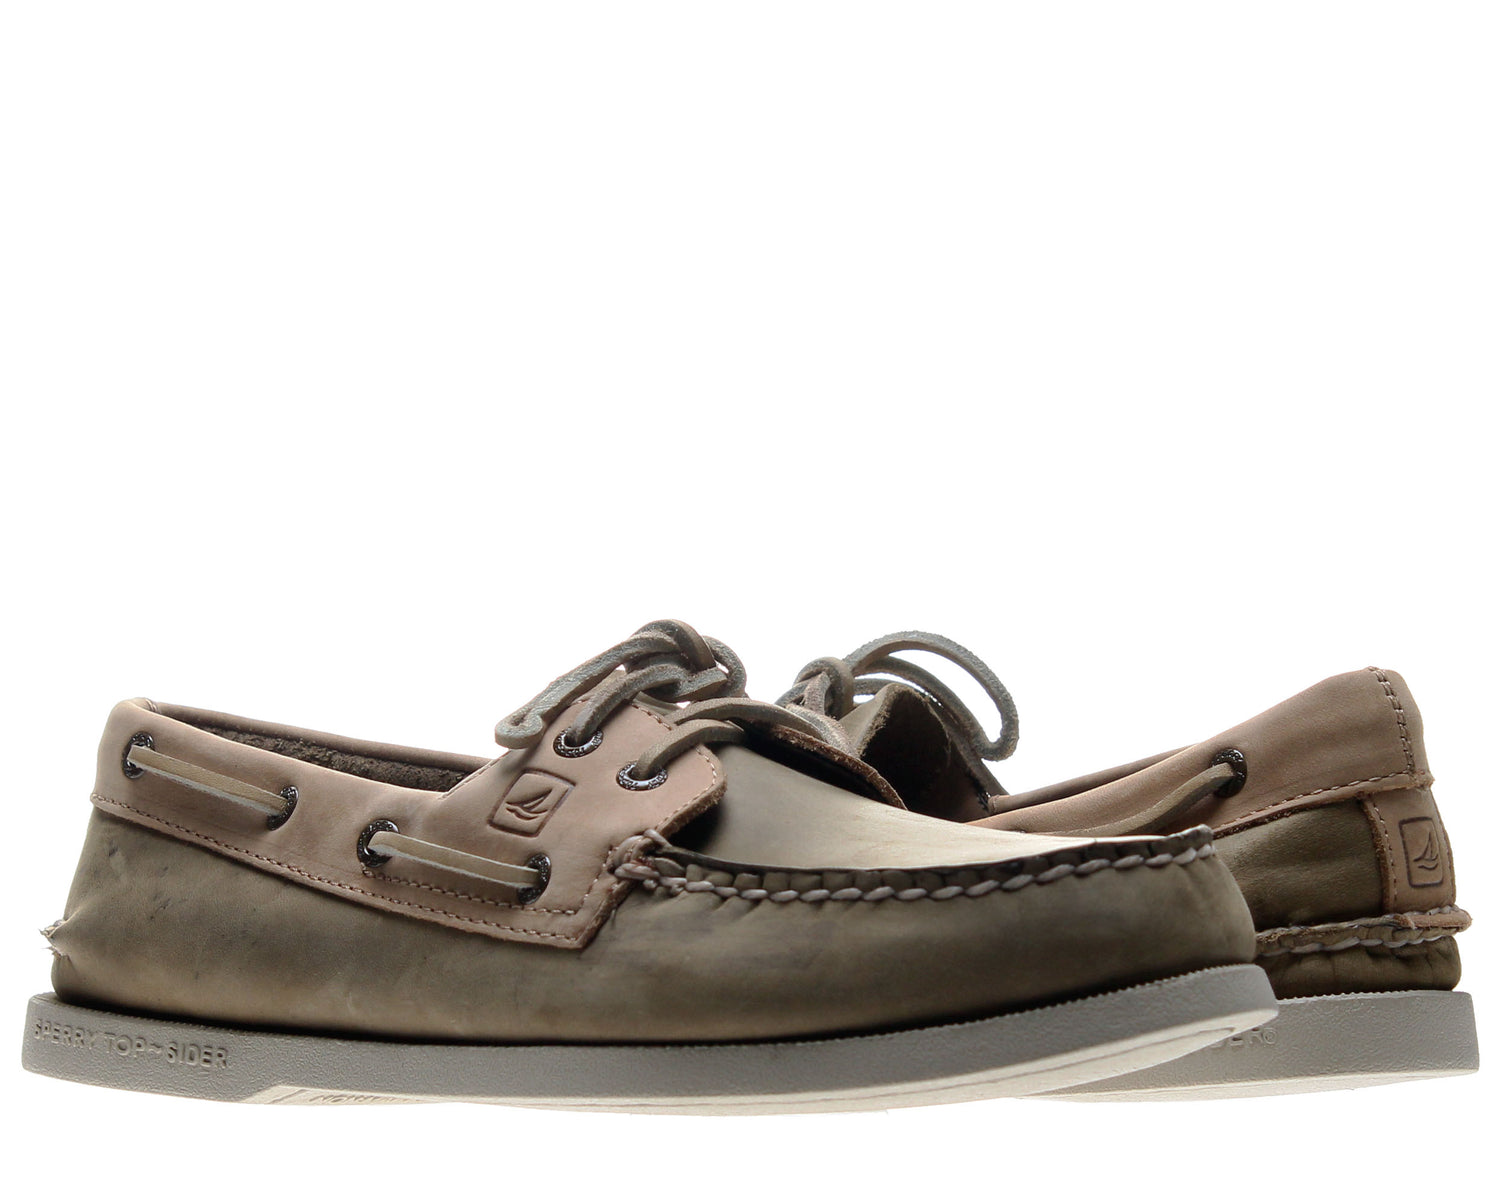 Sperry Top Sider Authentic Original Men's 2-Eye Boat Shoes